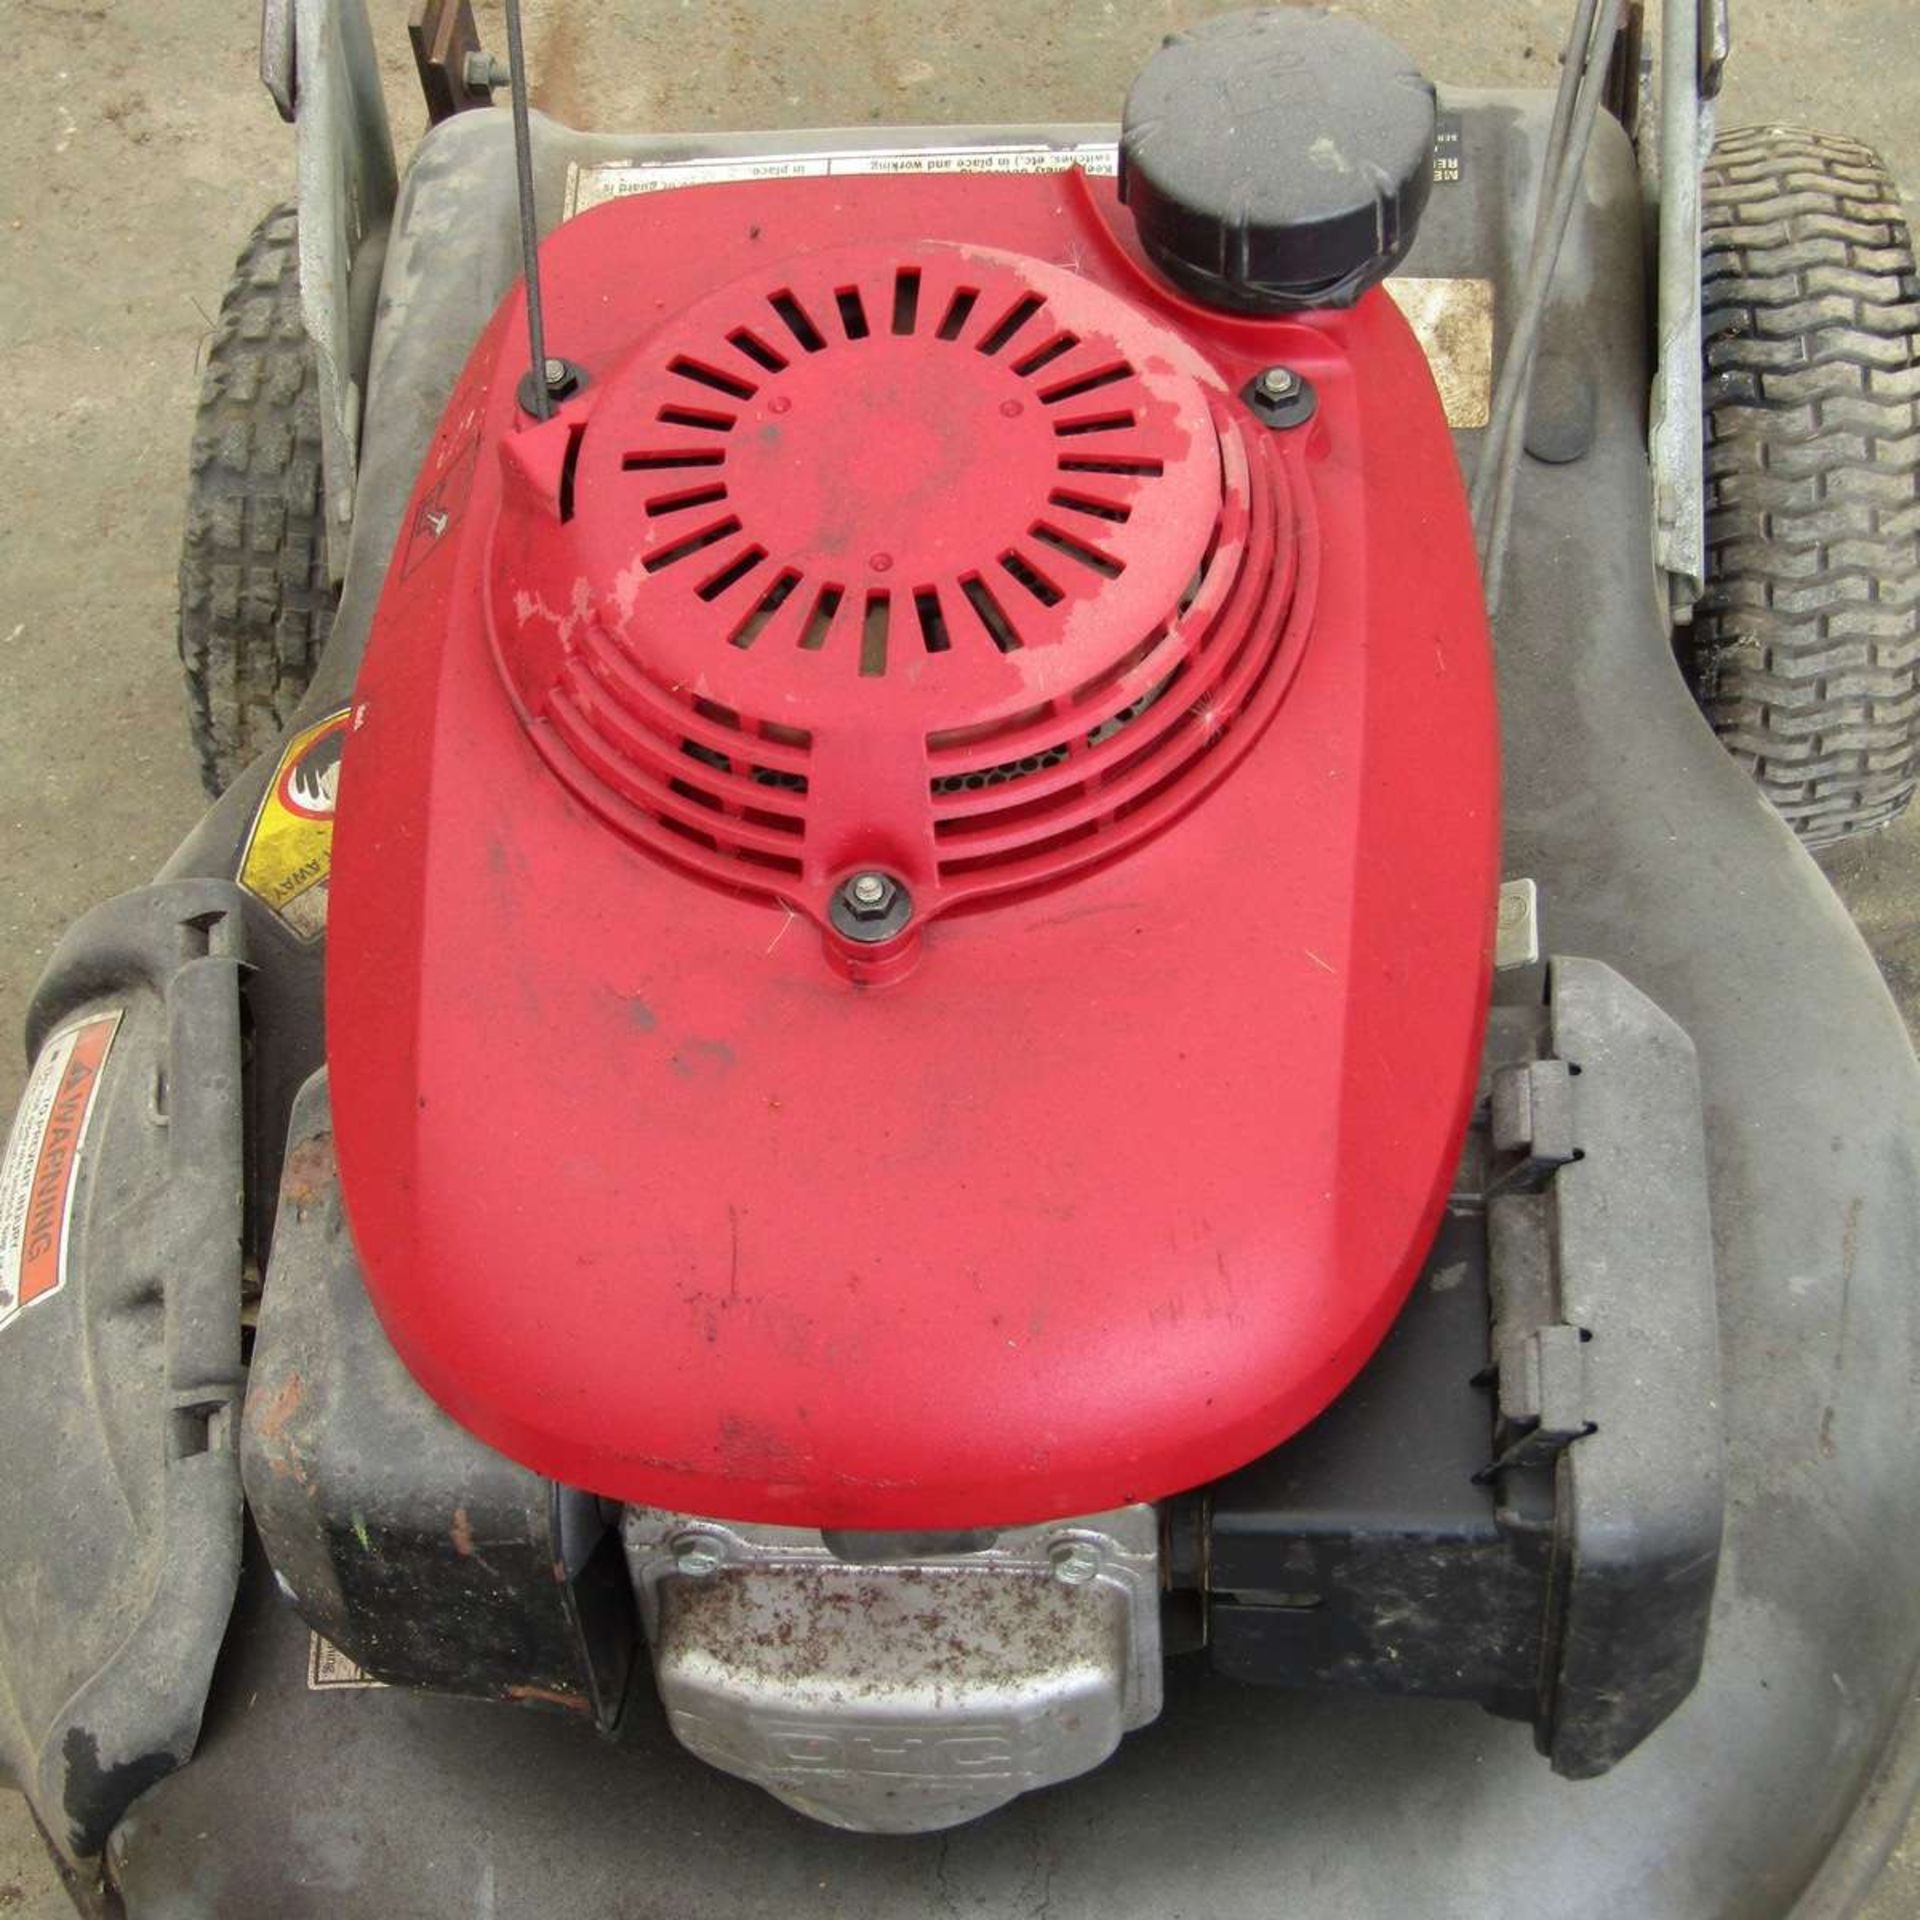 Honda HRS2162PDA 21" Lifted Lawn Mower - Image 2 of 2